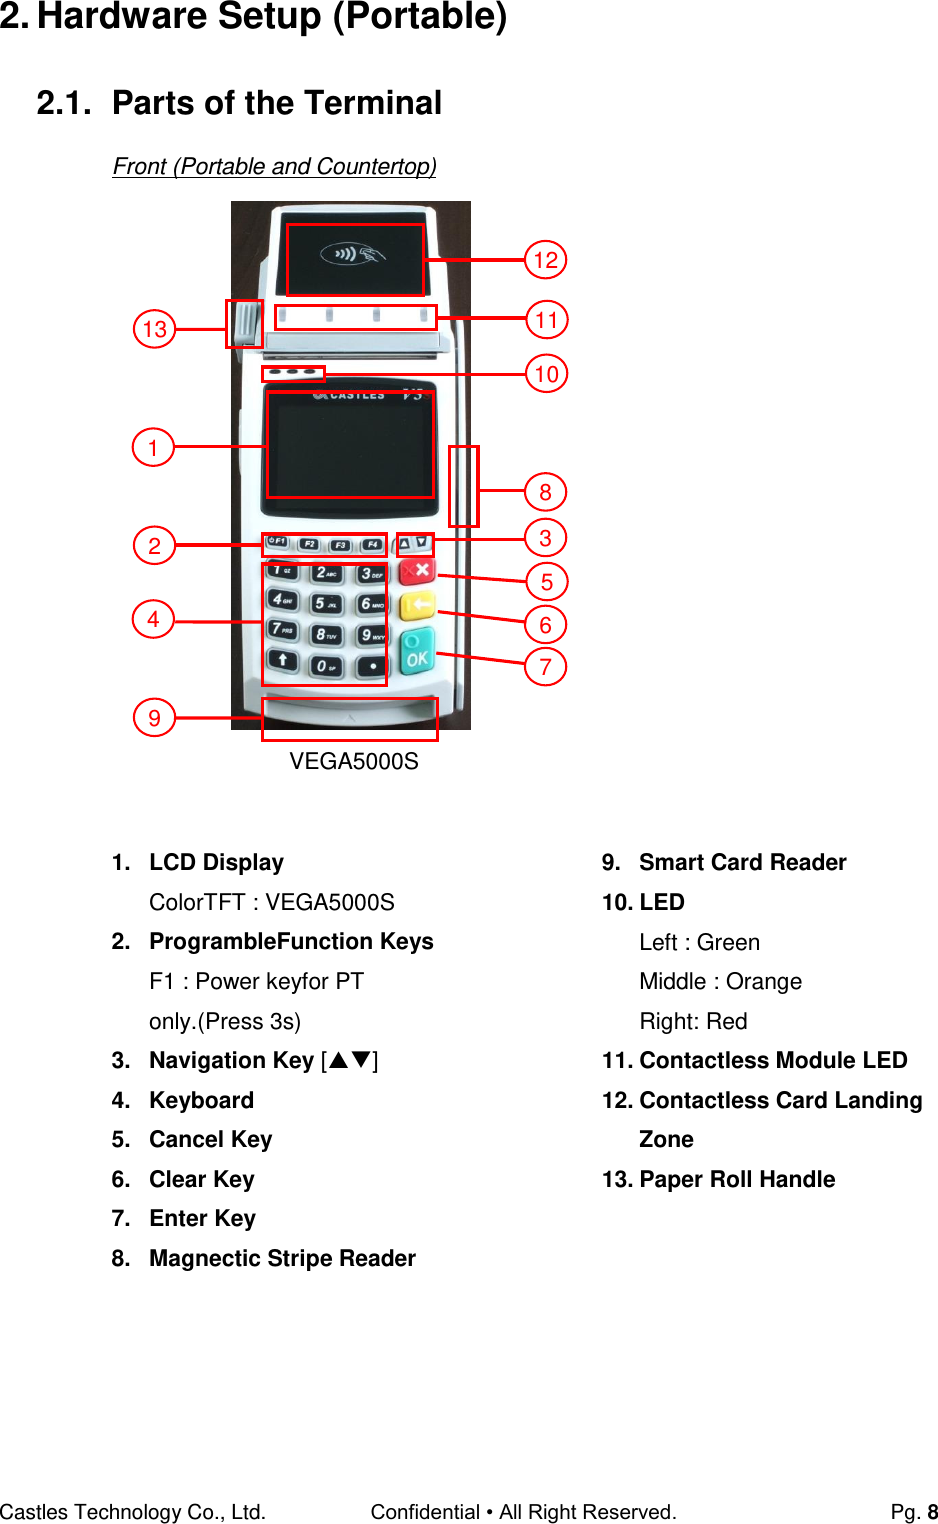 Castles Technology Co., Ltd. Confidential • All Right Reserved.  Pg. 8 2. Hardware Setup (Portable) 2.1.  Parts of the Terminal Front (Portable and Countertop)                       1.  LCD Display ColorTFT : VEGA5000S 2.  ProgrambleFunction Keys F1 : Power keyfor PT only.(Press 3s) 3.  Navigation Key [] 4.  Keyboard 5.  Cancel Key 6.  Clear Key 7.  Enter Key 8.  Magnectic Stripe Reader 9.  Smart Card Reader 10. LED Left : Green Middle : Orange Right: Red 11. Contactless Module LED 12. Contactless Card Landing Zone 13. Paper Roll Handle      VEGA5000S 1 2 3 5 8 9 10 6 7 4 13 12 11 